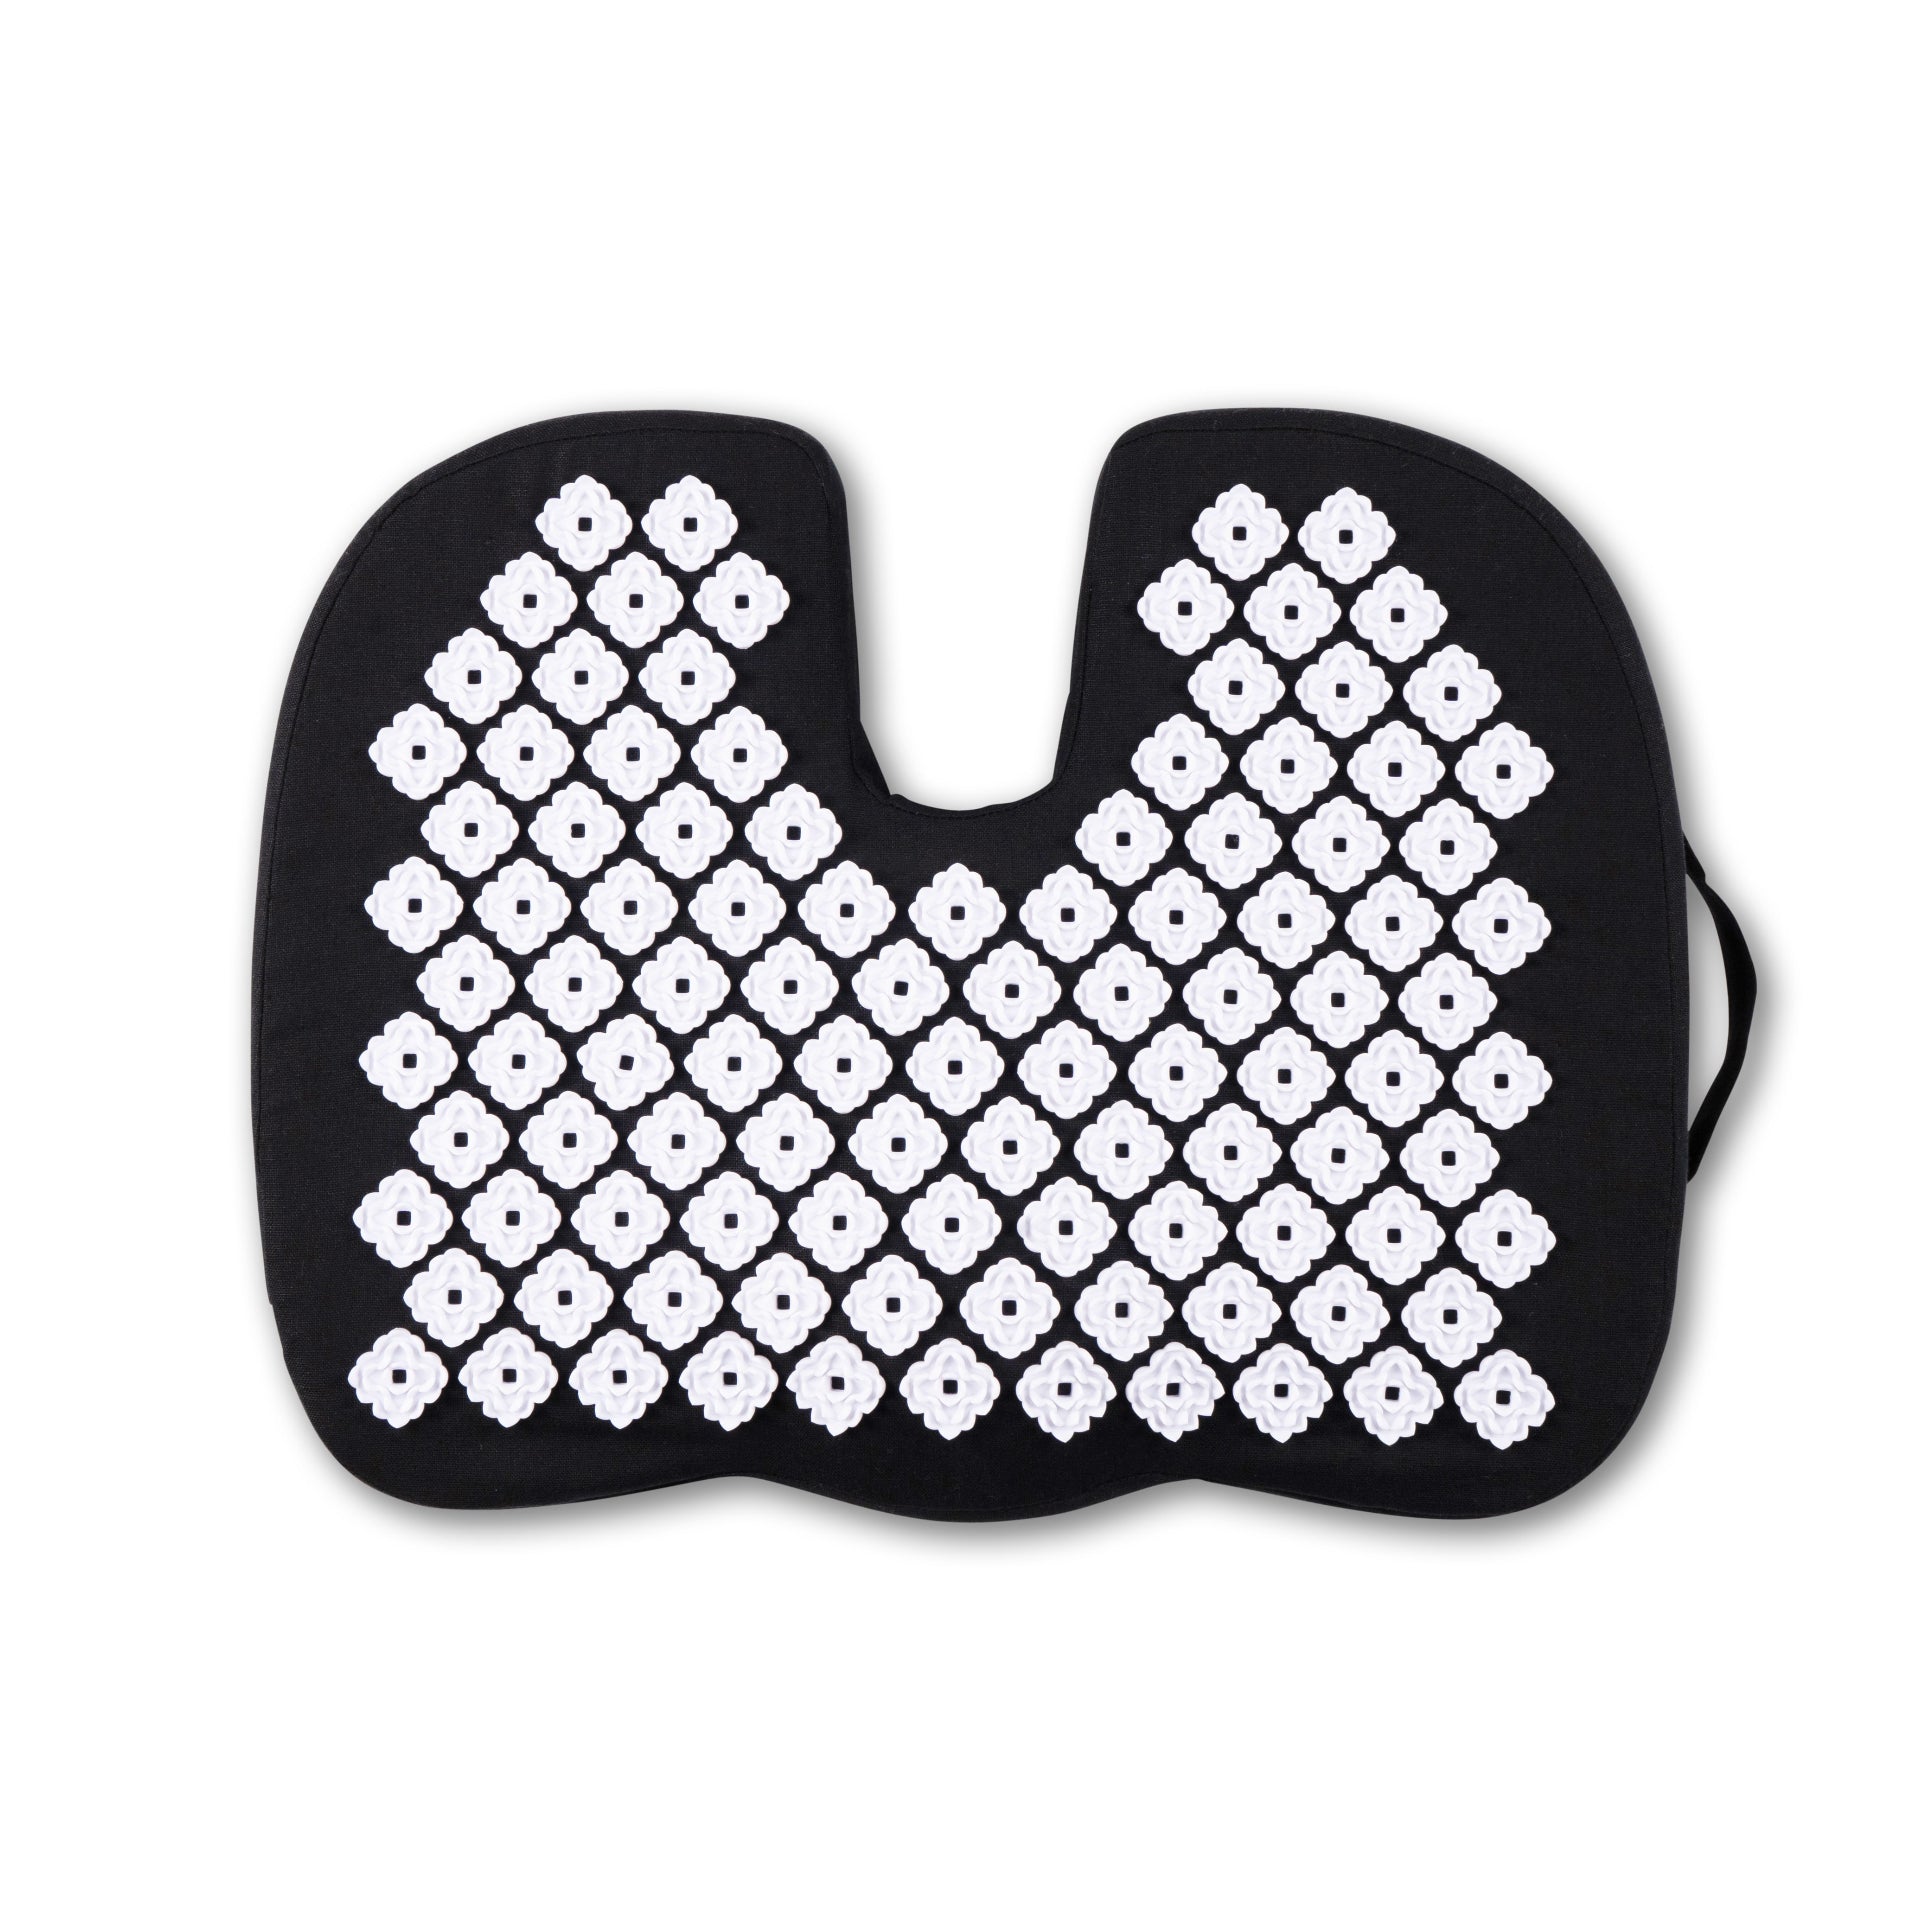 Kanjo Acupressure Back Pain Relief Cushion